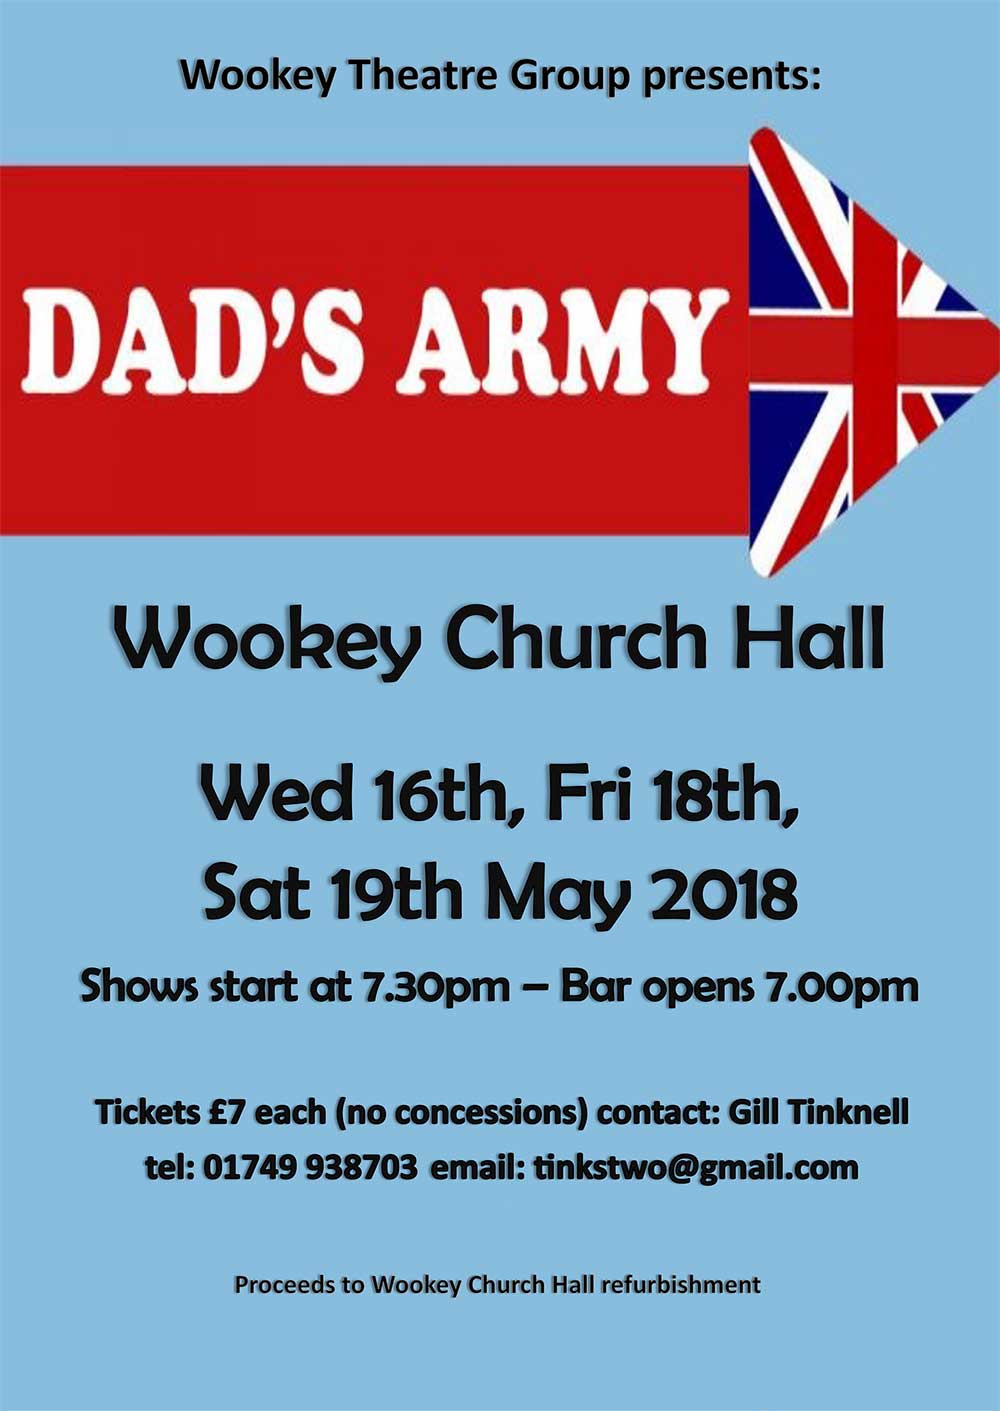 Dad's Army Wookey Theatre Group